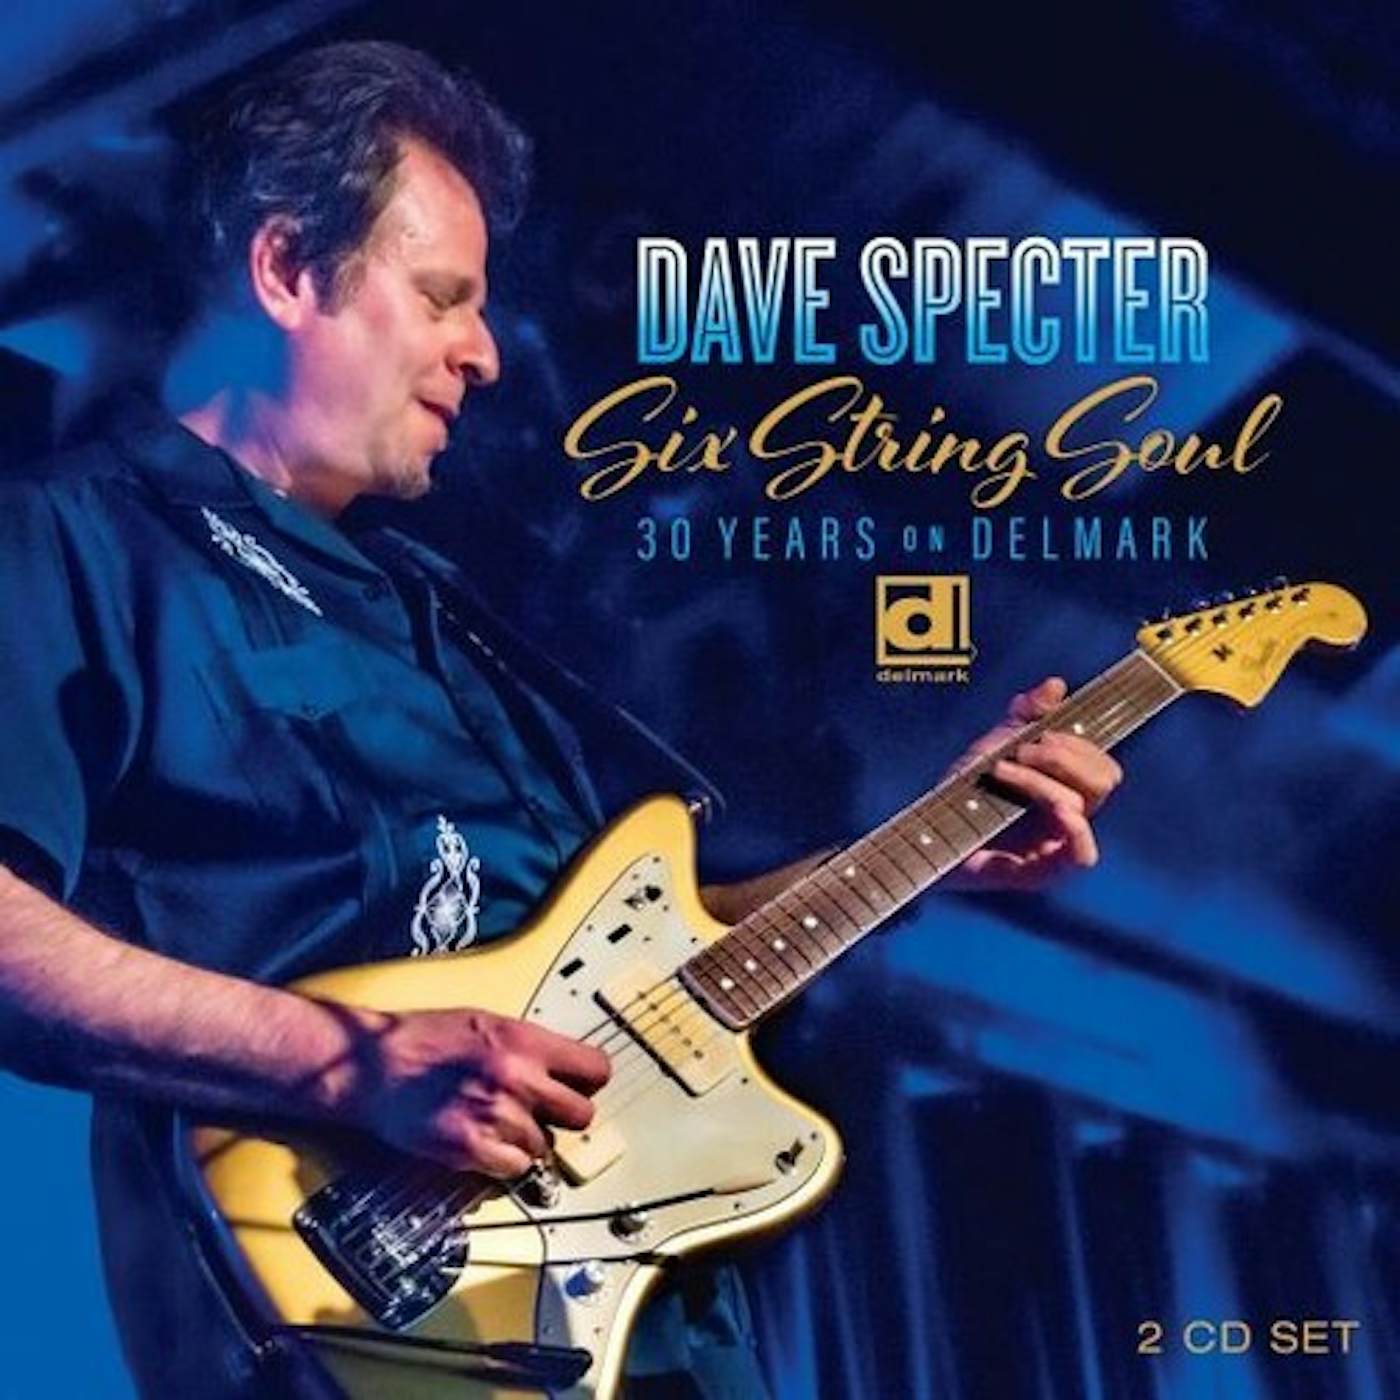 Dave Specter SIX STRING SOUL: 30 YEARS ON DELMARK CD